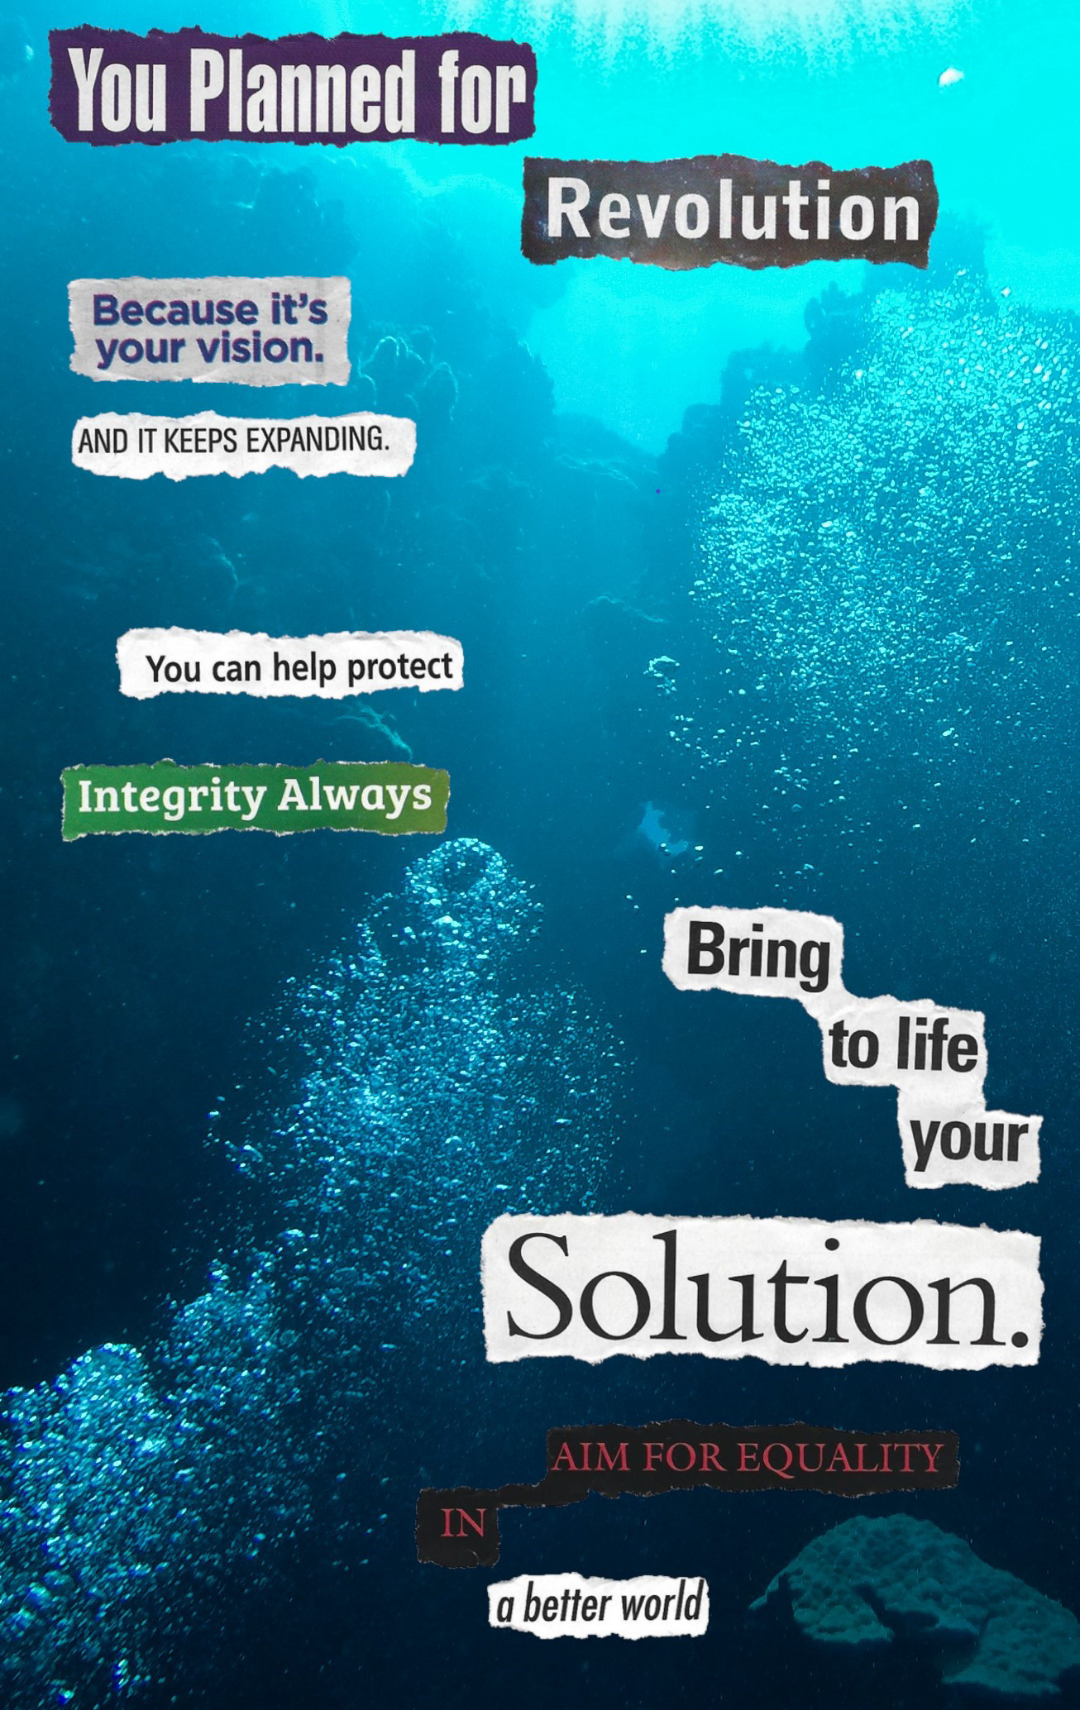 words pasted on photograph of undersea life that says you planned for
        			revolution because its your vision and it keeps expanding you can help
        			protect integrity always bring to life your solution aim for equality in 
        			a better world